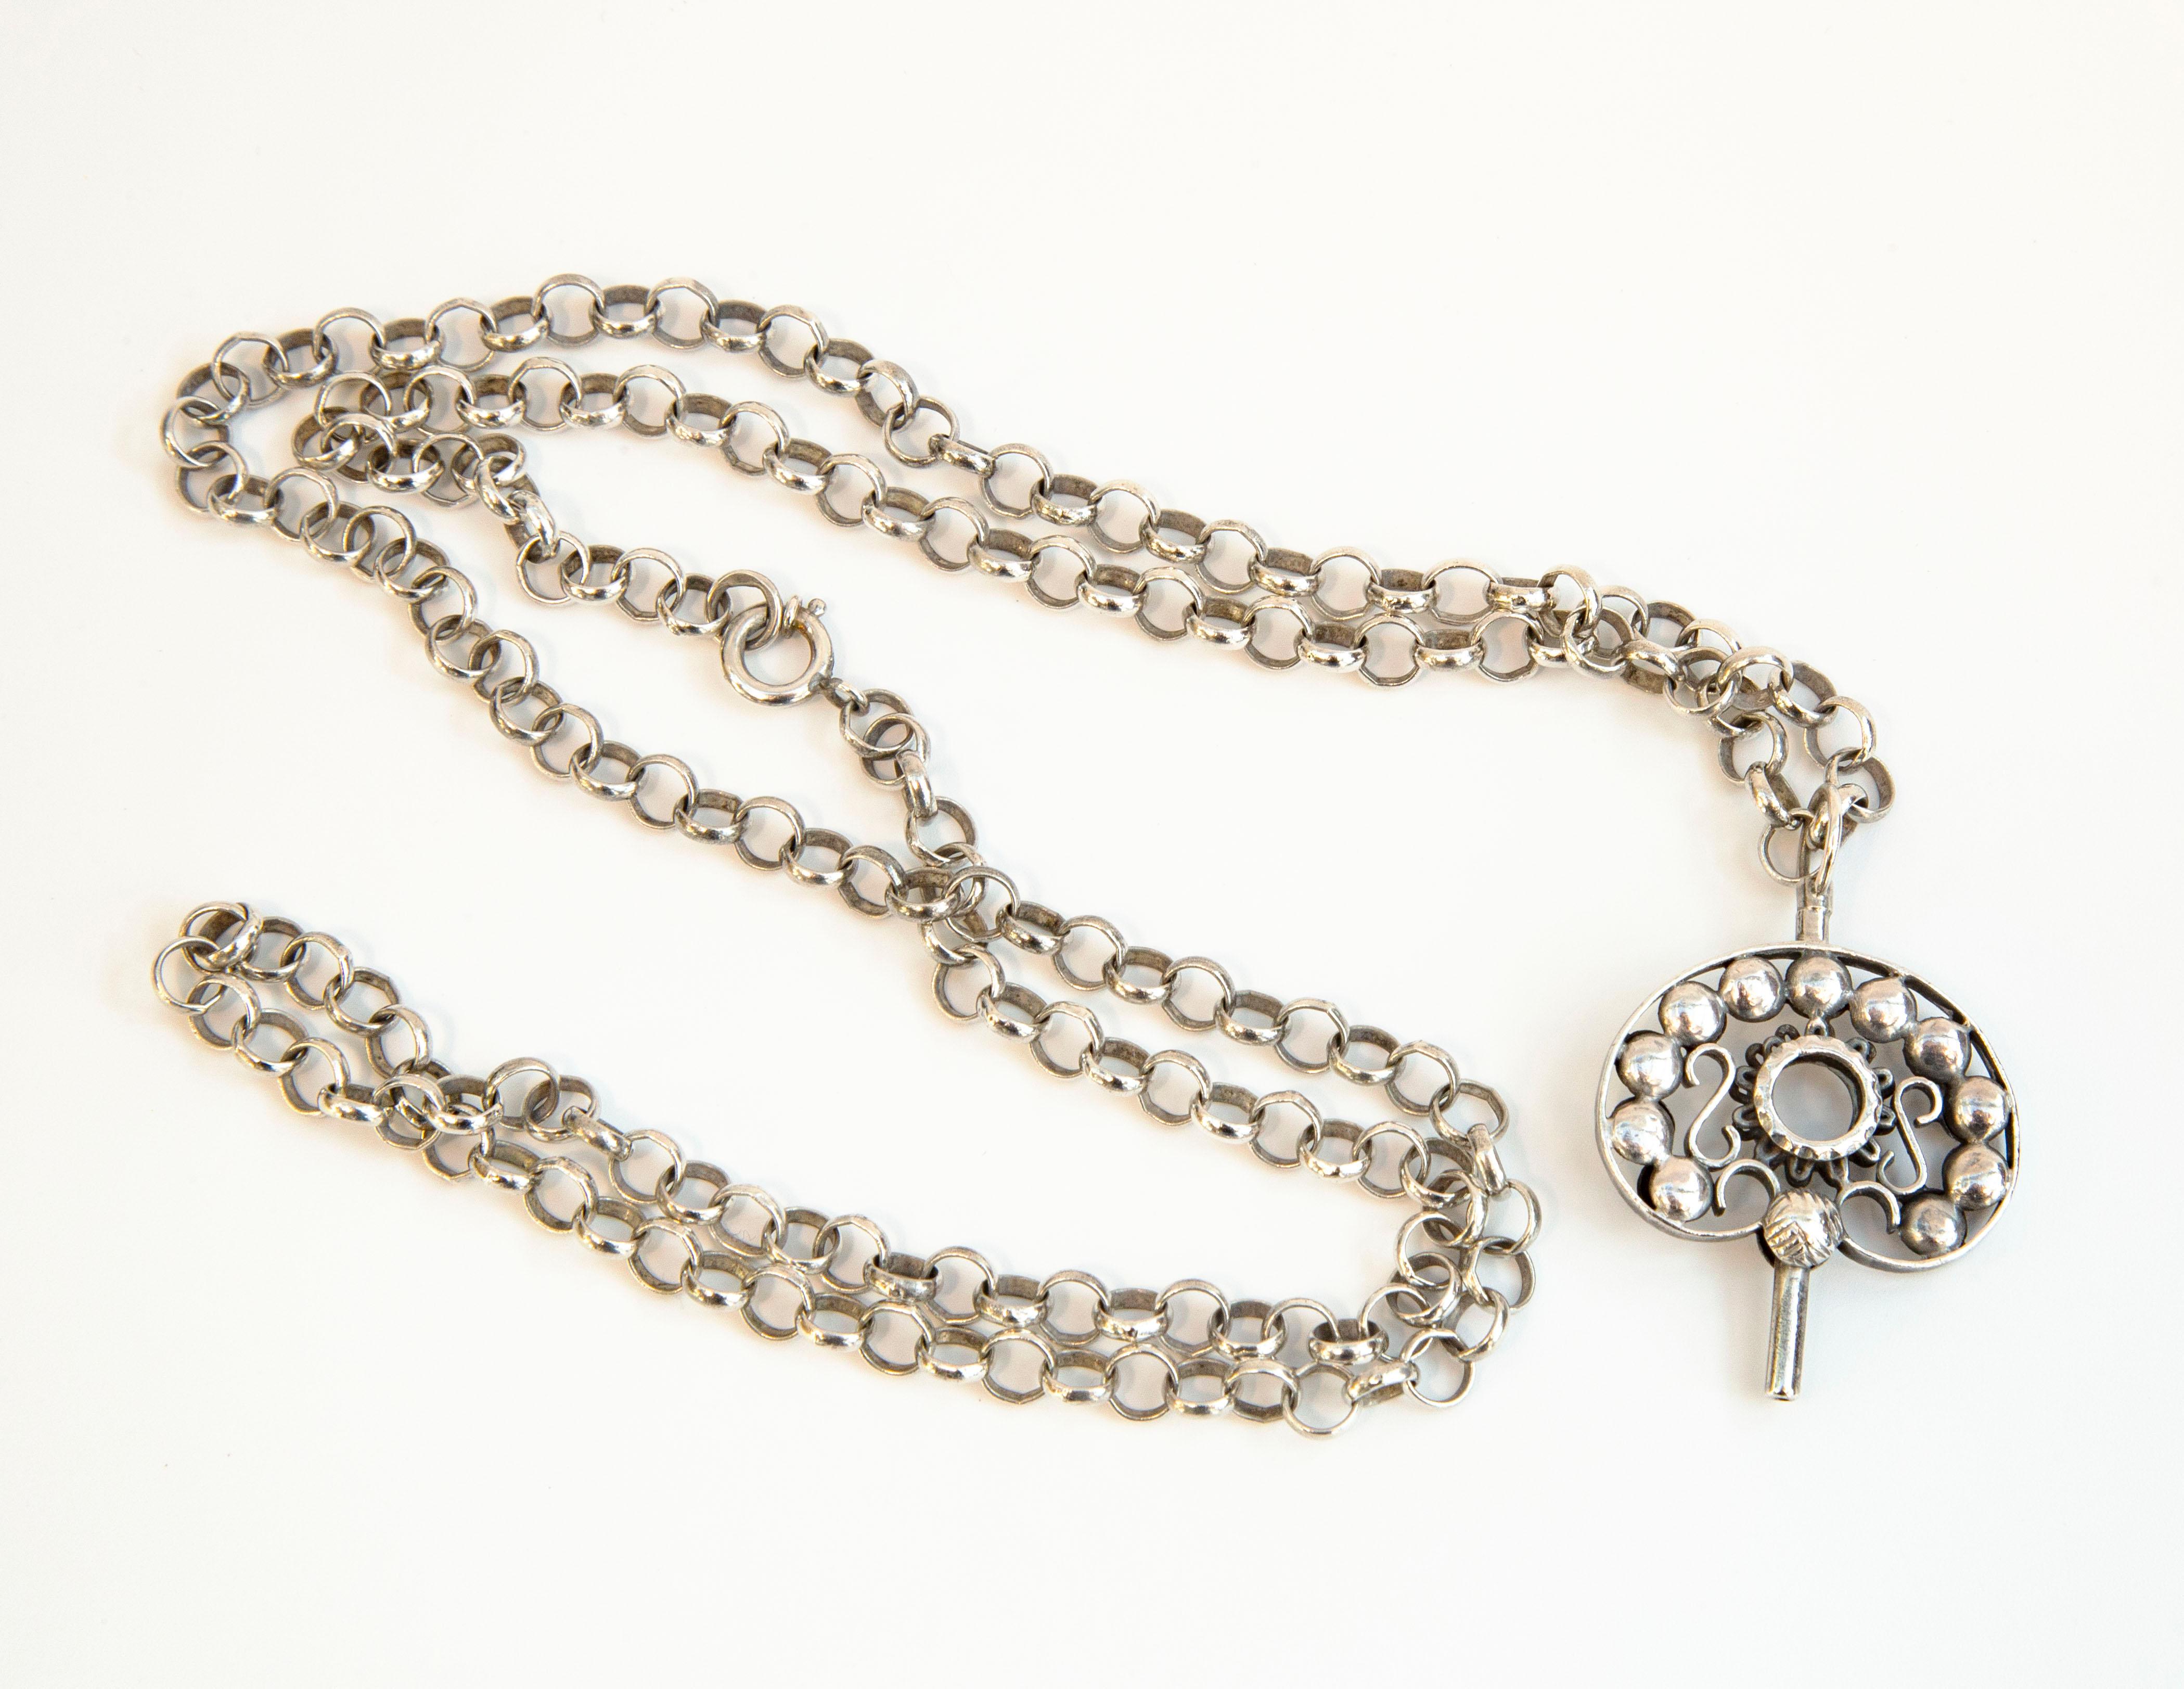 An antique silver jasseron necklace with an antique watch key (pendant). The necklace can be closed with a spring ring clasp that is in good working condition.  The items were manufactured in the Netherlands in the first half of the 19th century,